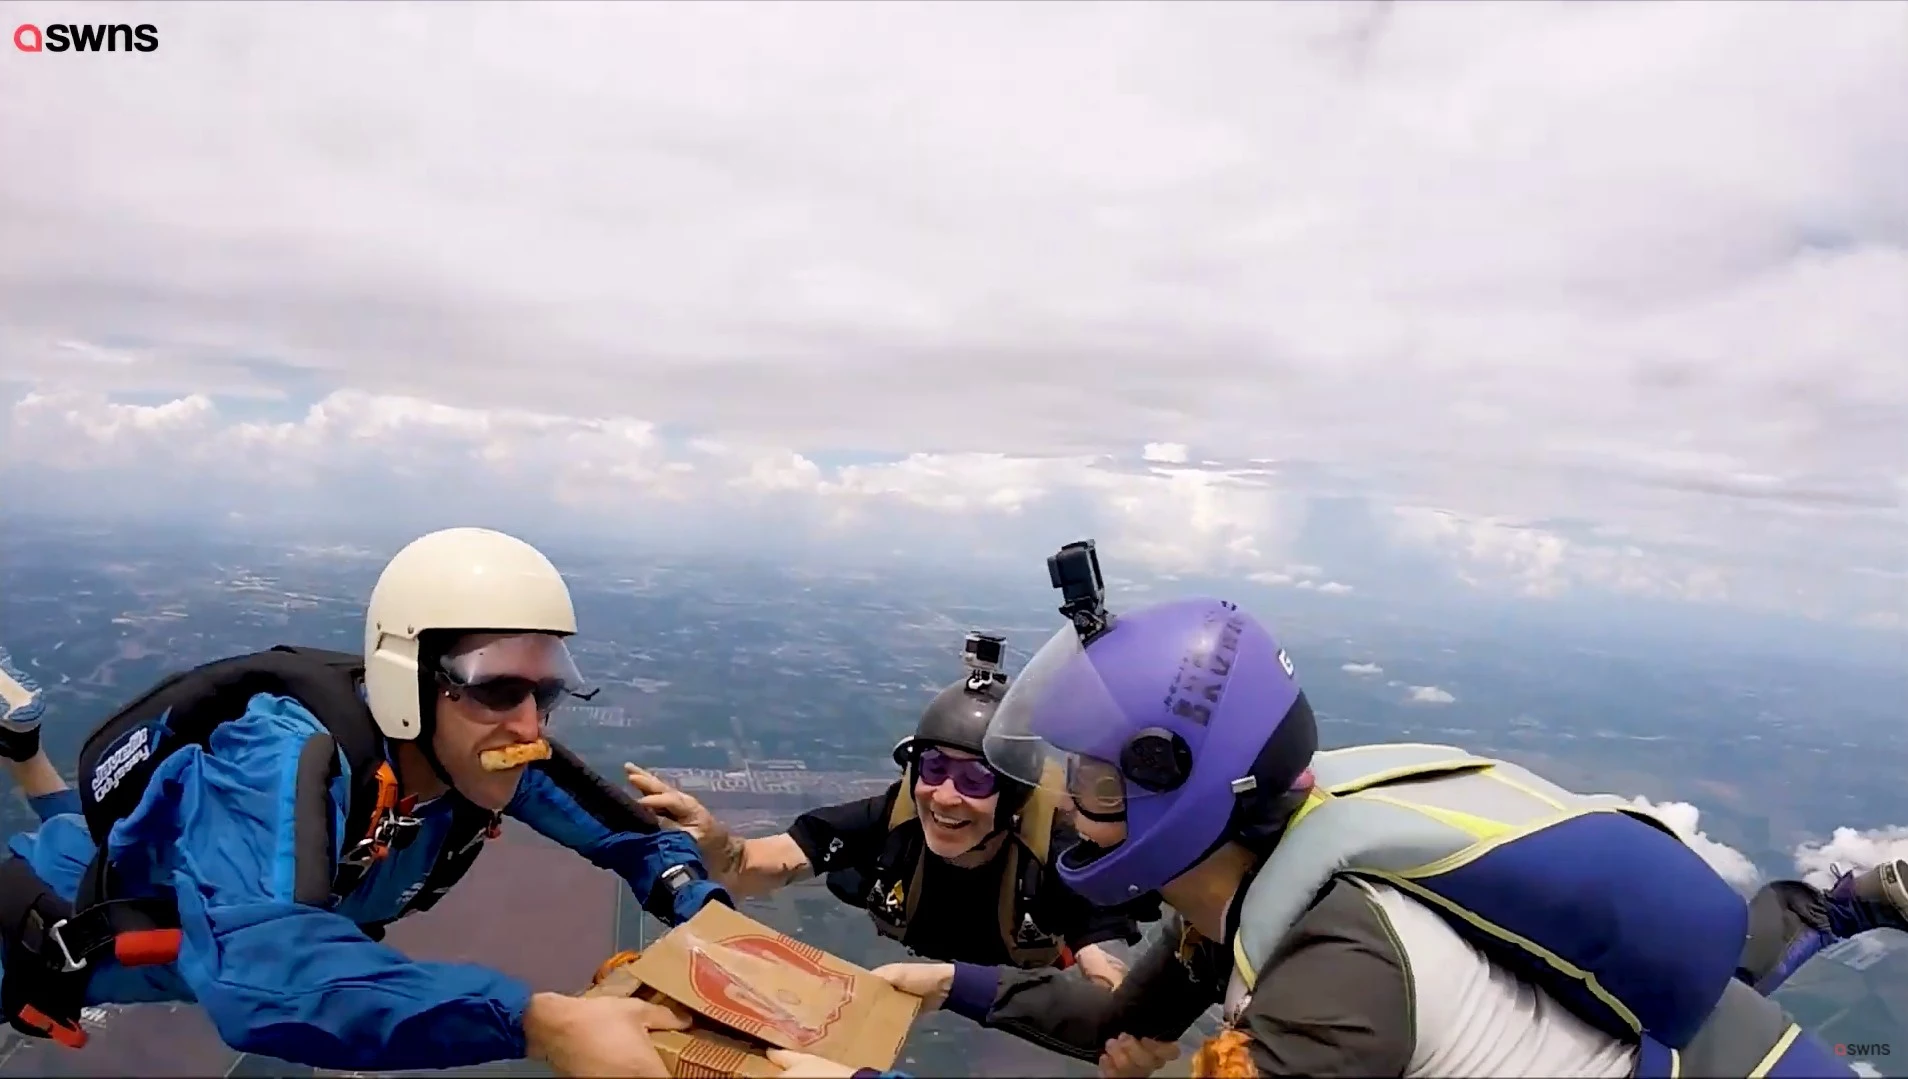 Texas Skydivers Filmed Eat Pizza While Free Falling 14,000 Feet